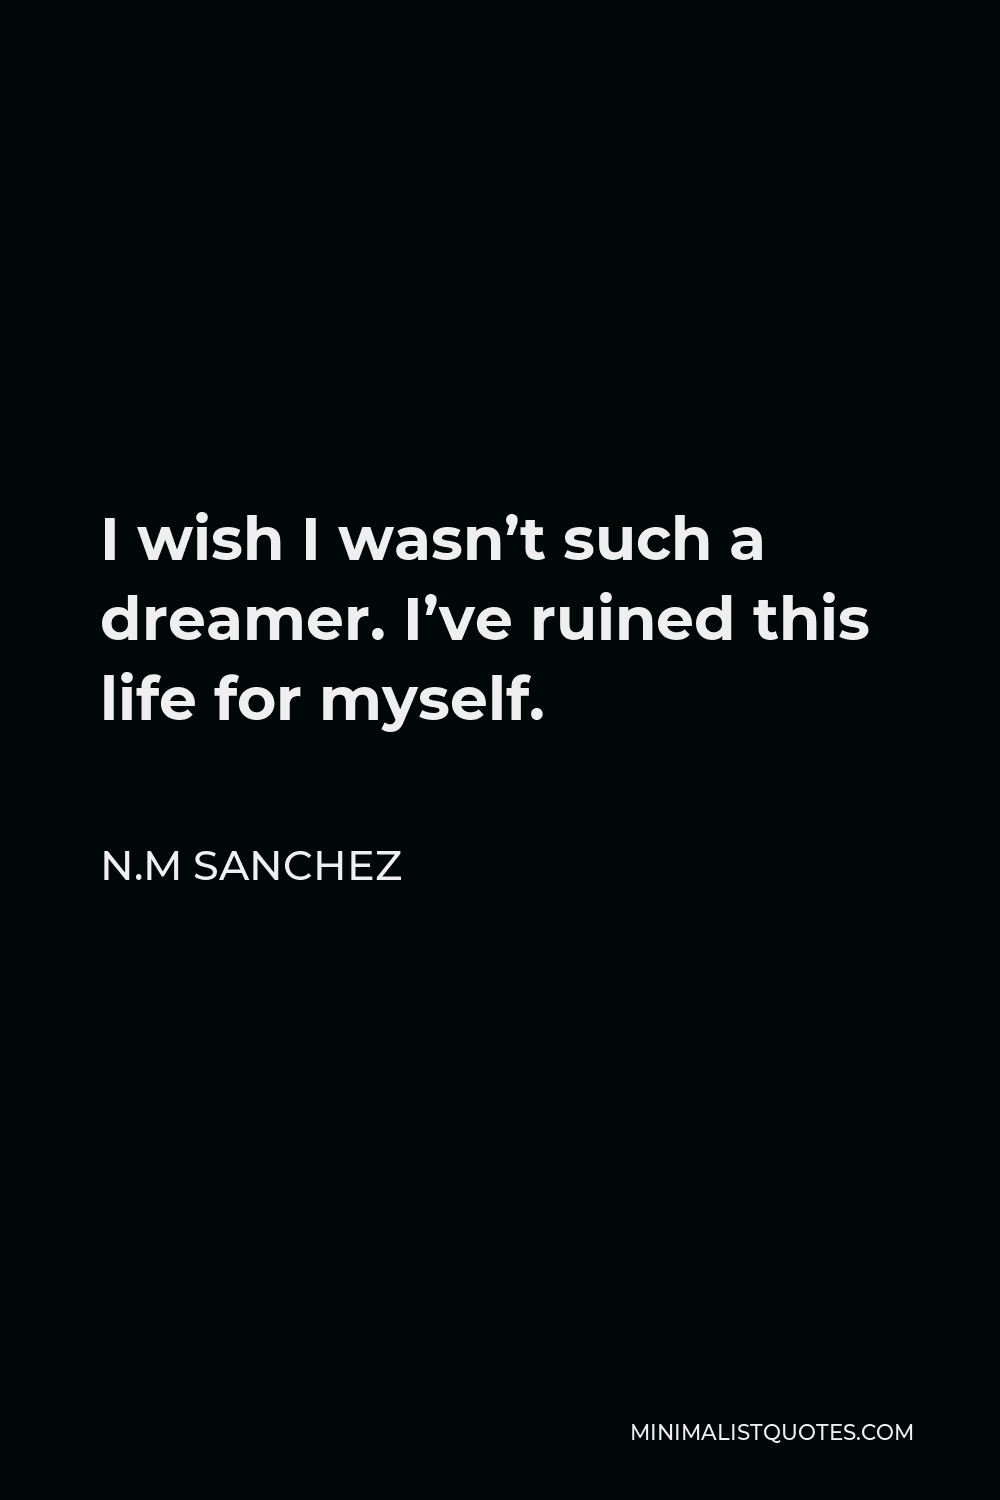 N.M Sanchez Quote - I wish I wasn’t such a dreamer. I’ve ruined this life for myself.